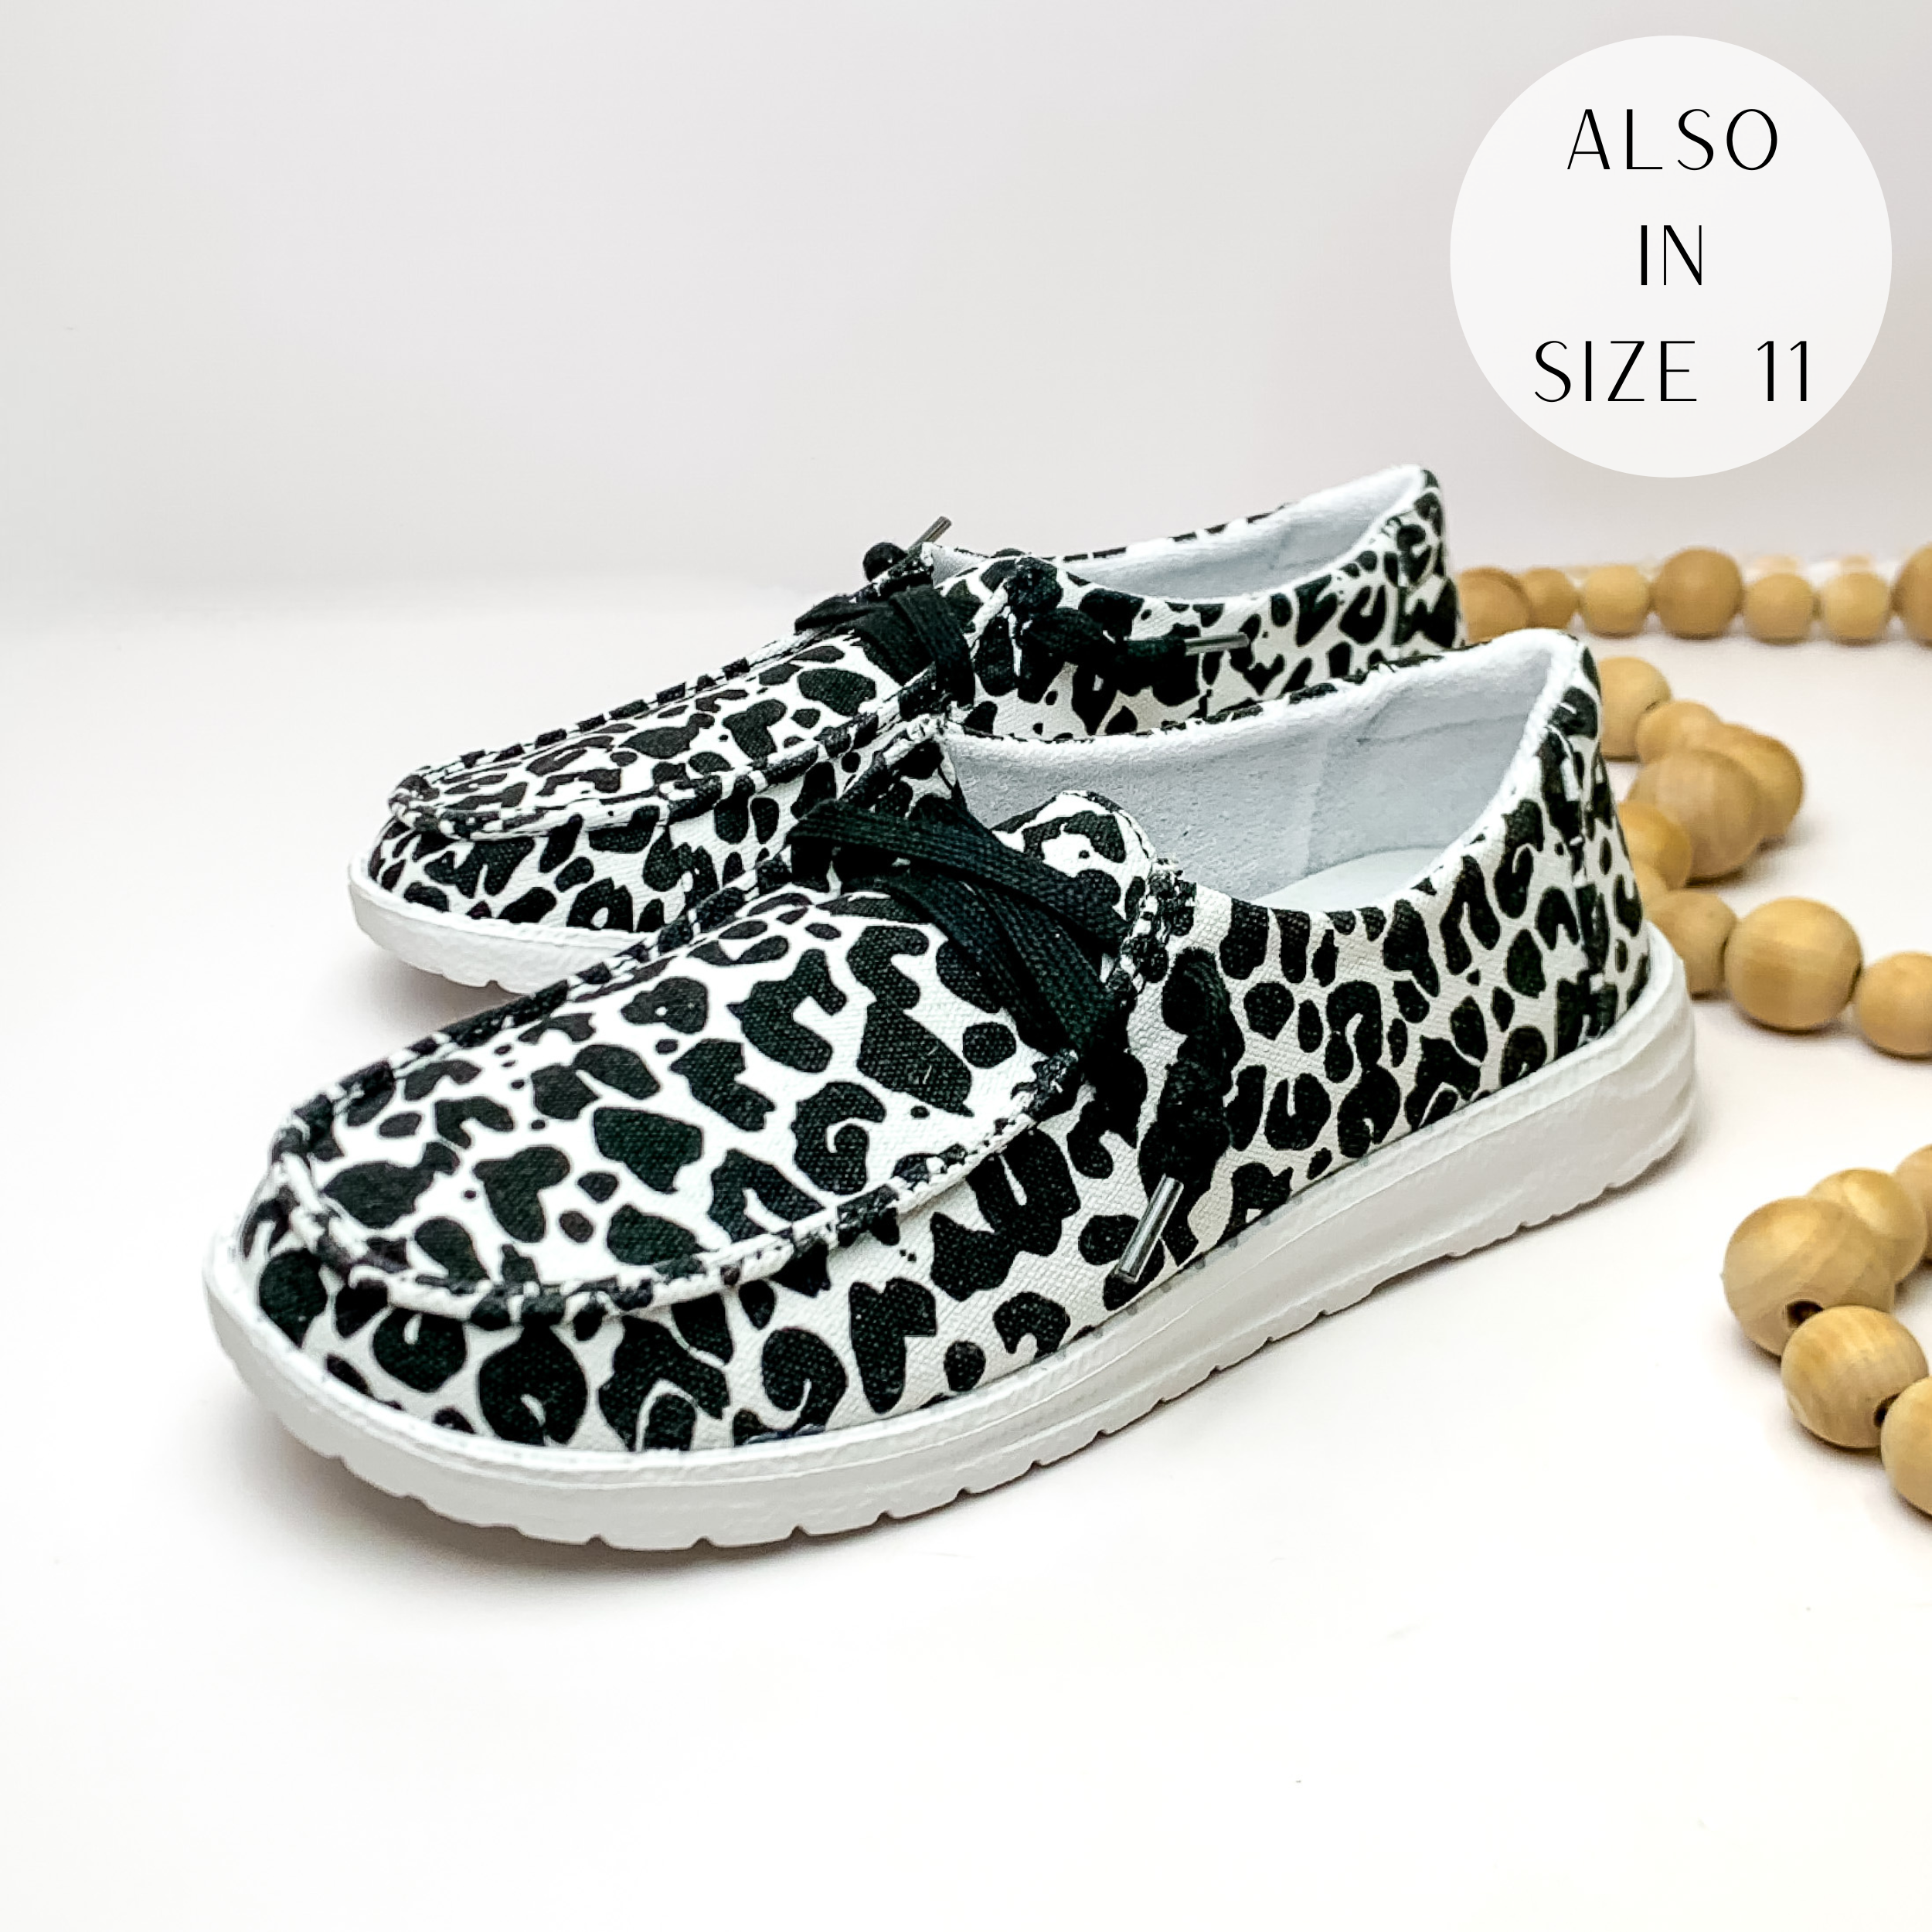 White, slip on loafers with a black leopard print and black laces. These shoes are pictured on a white background with tan beads on the right hand side. 